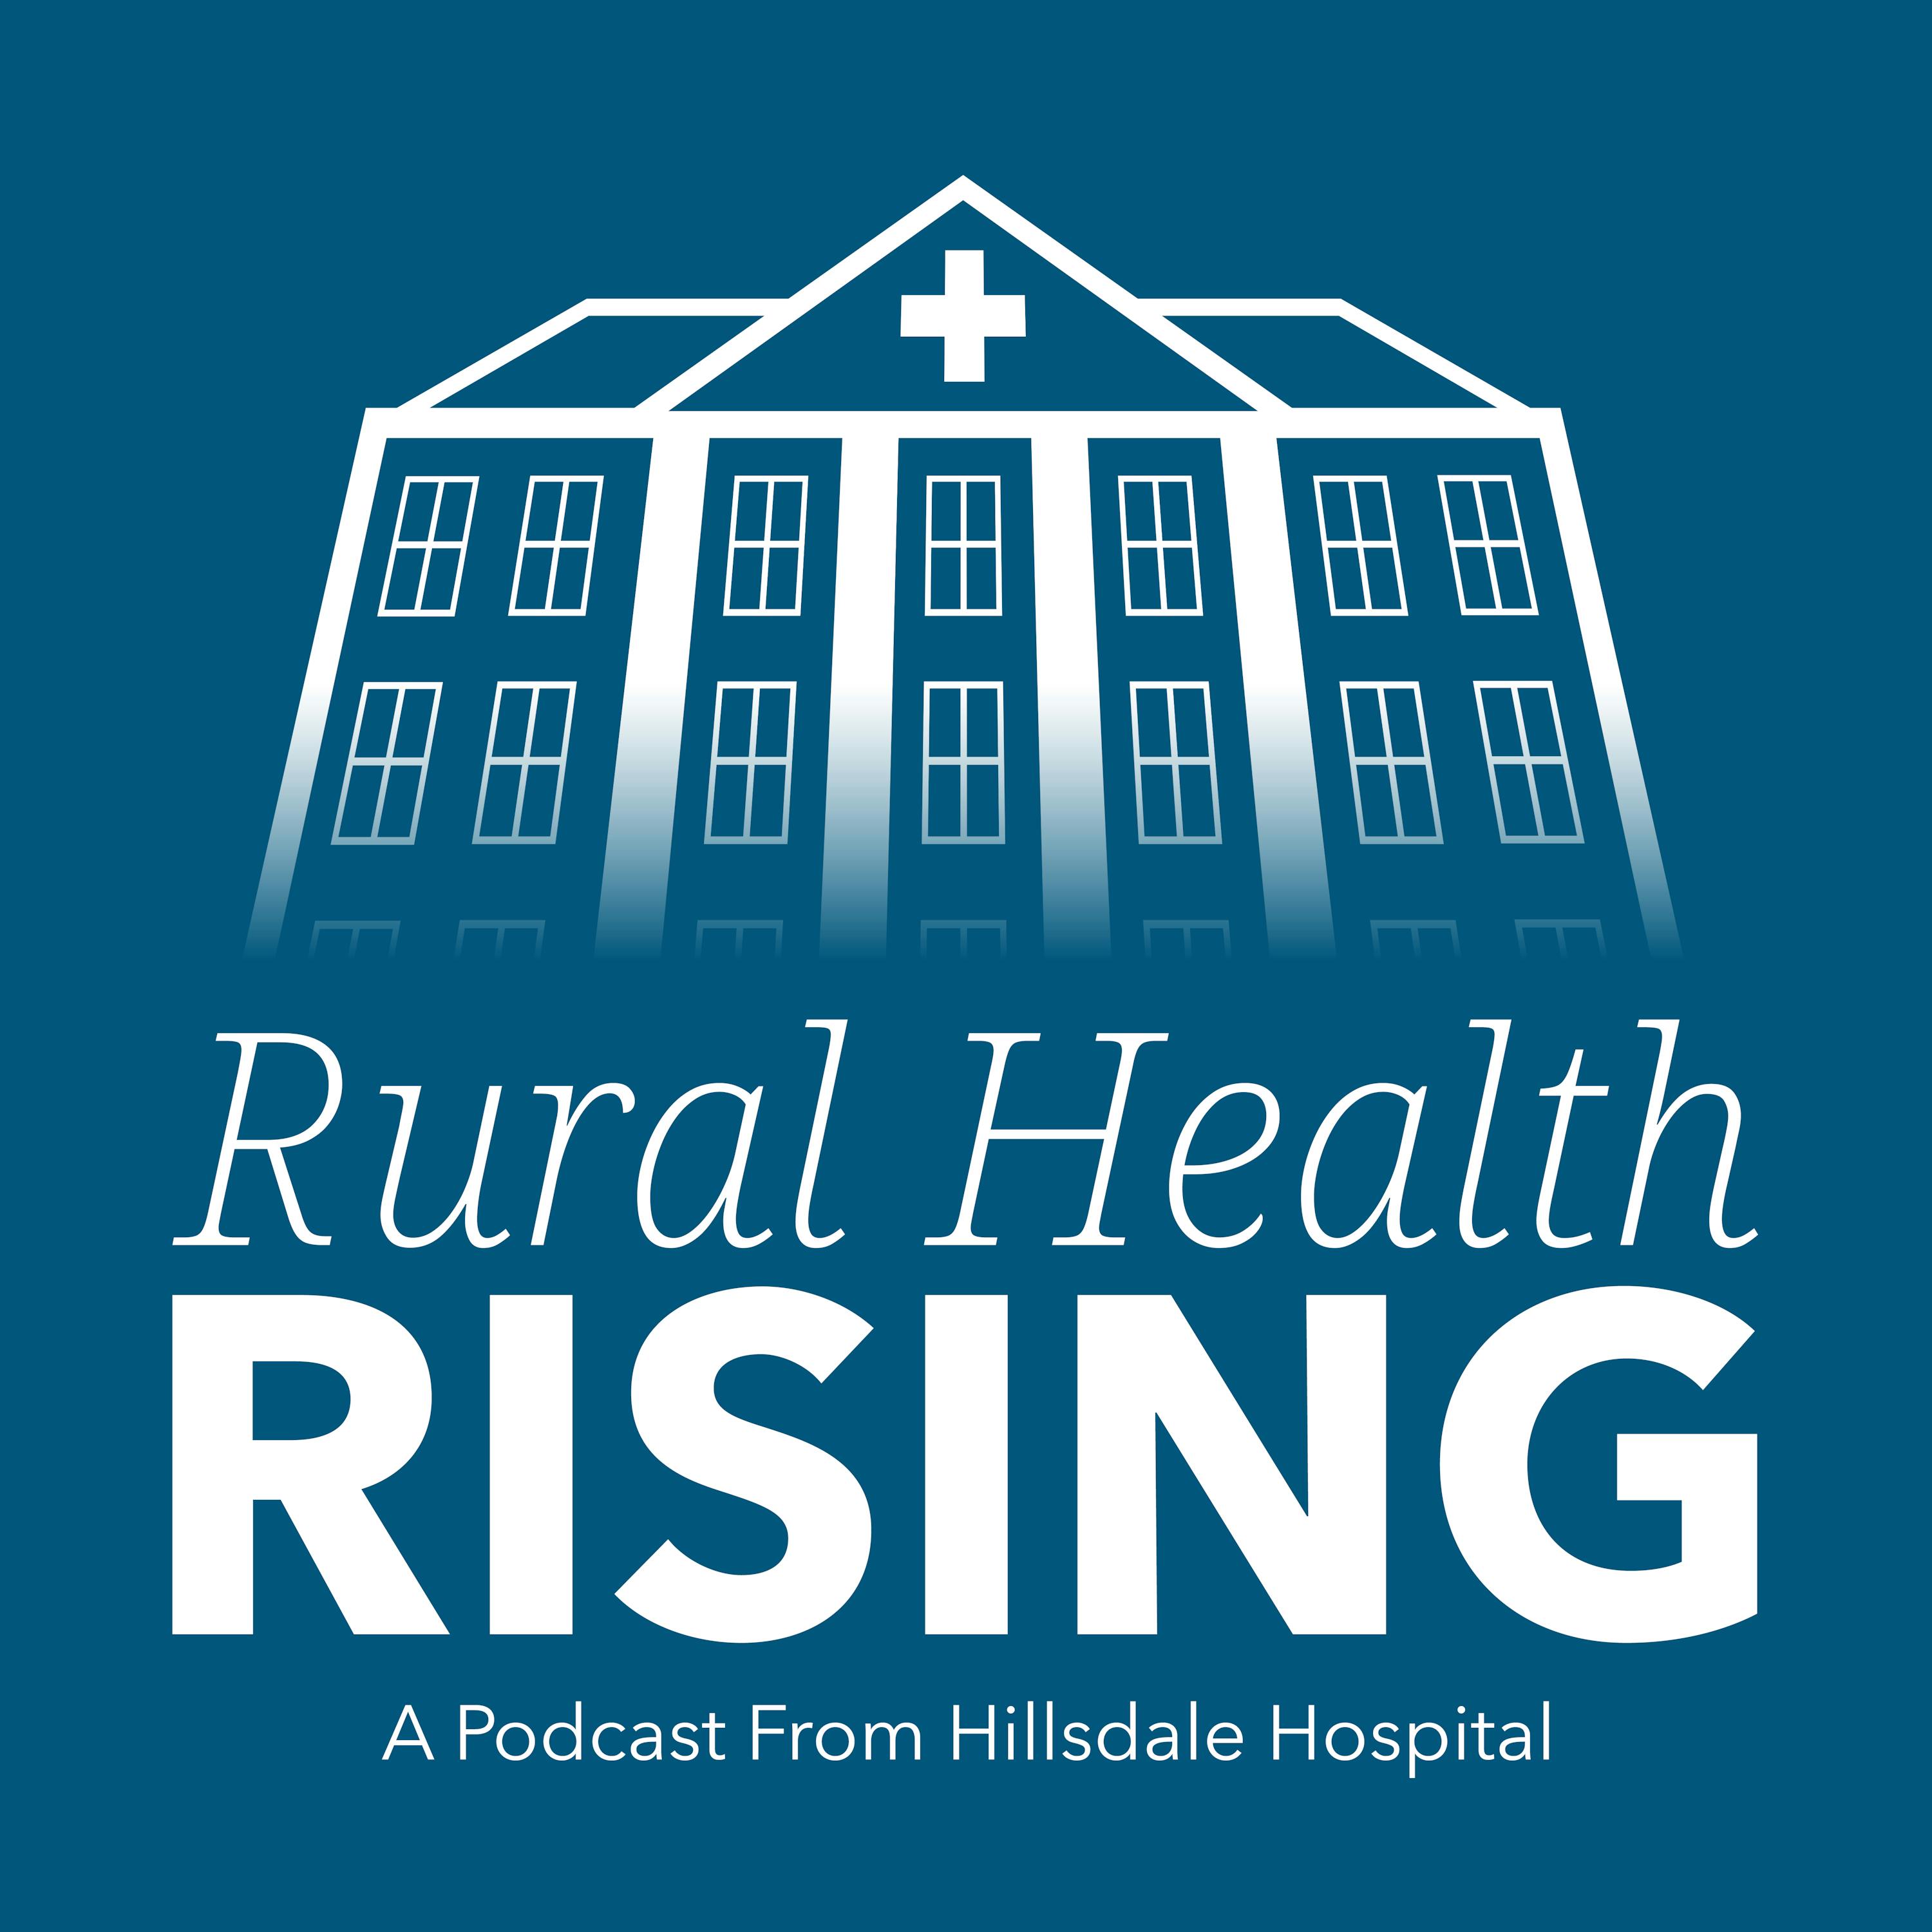 Episode 85: Rural Health in Remote Areas